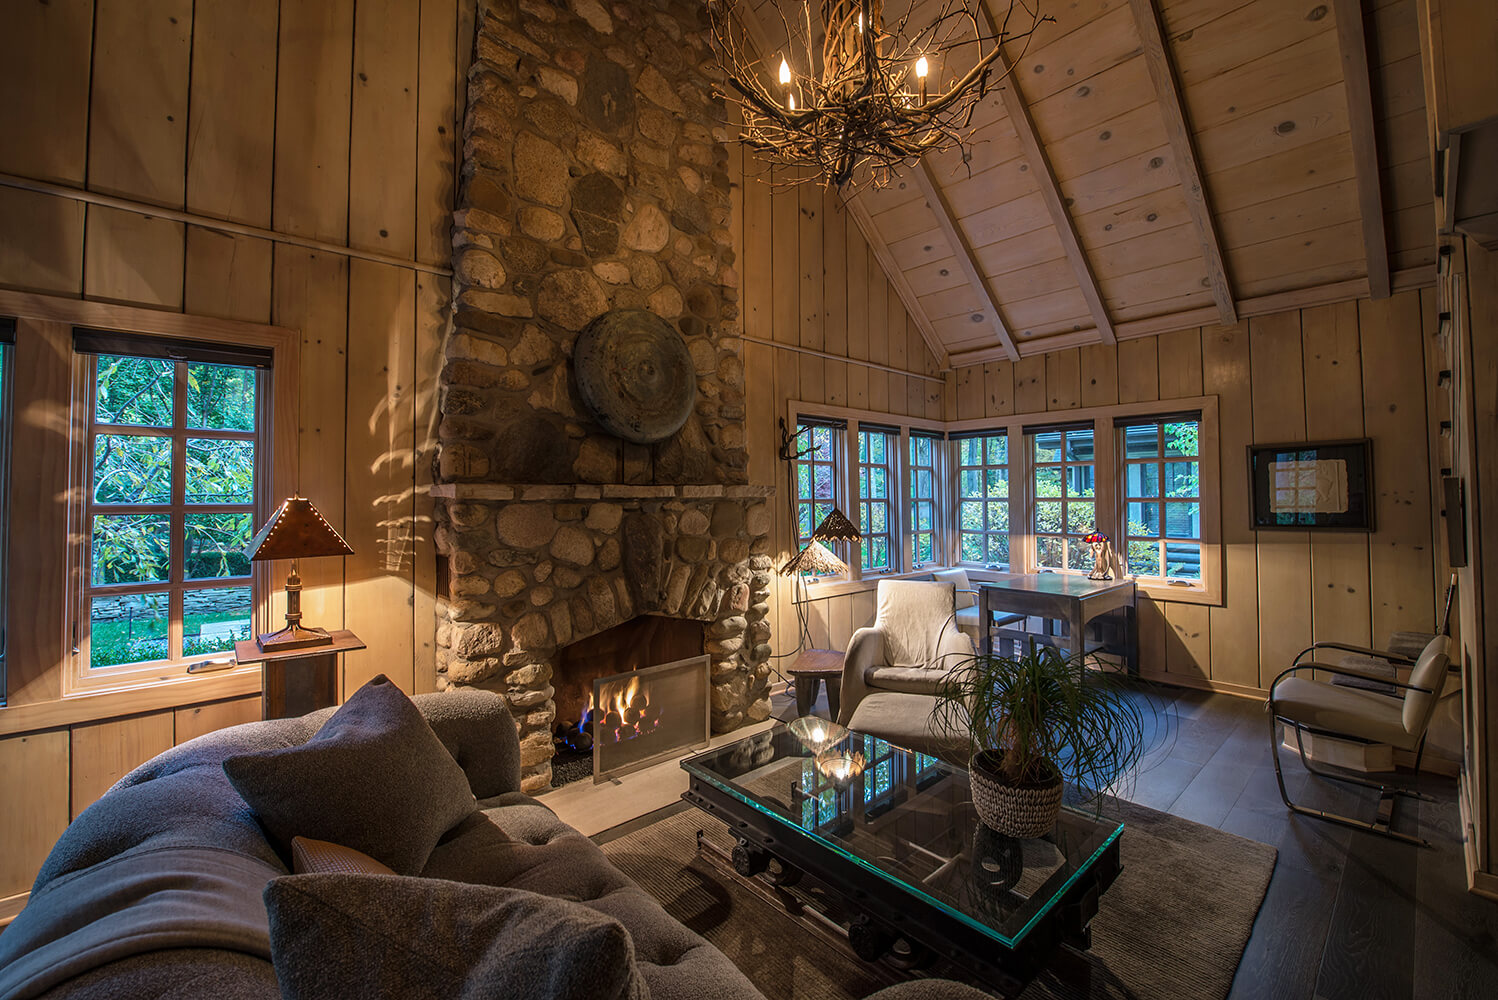 Michigan, Indiana, Cottage, Pine Paneling, Copper roof, Stone Fireplace, Conservatory, interior design, eclectic, modern, antiques, gardens, cabin, stucco, shingles, copper, stone patio, linen, slipcover